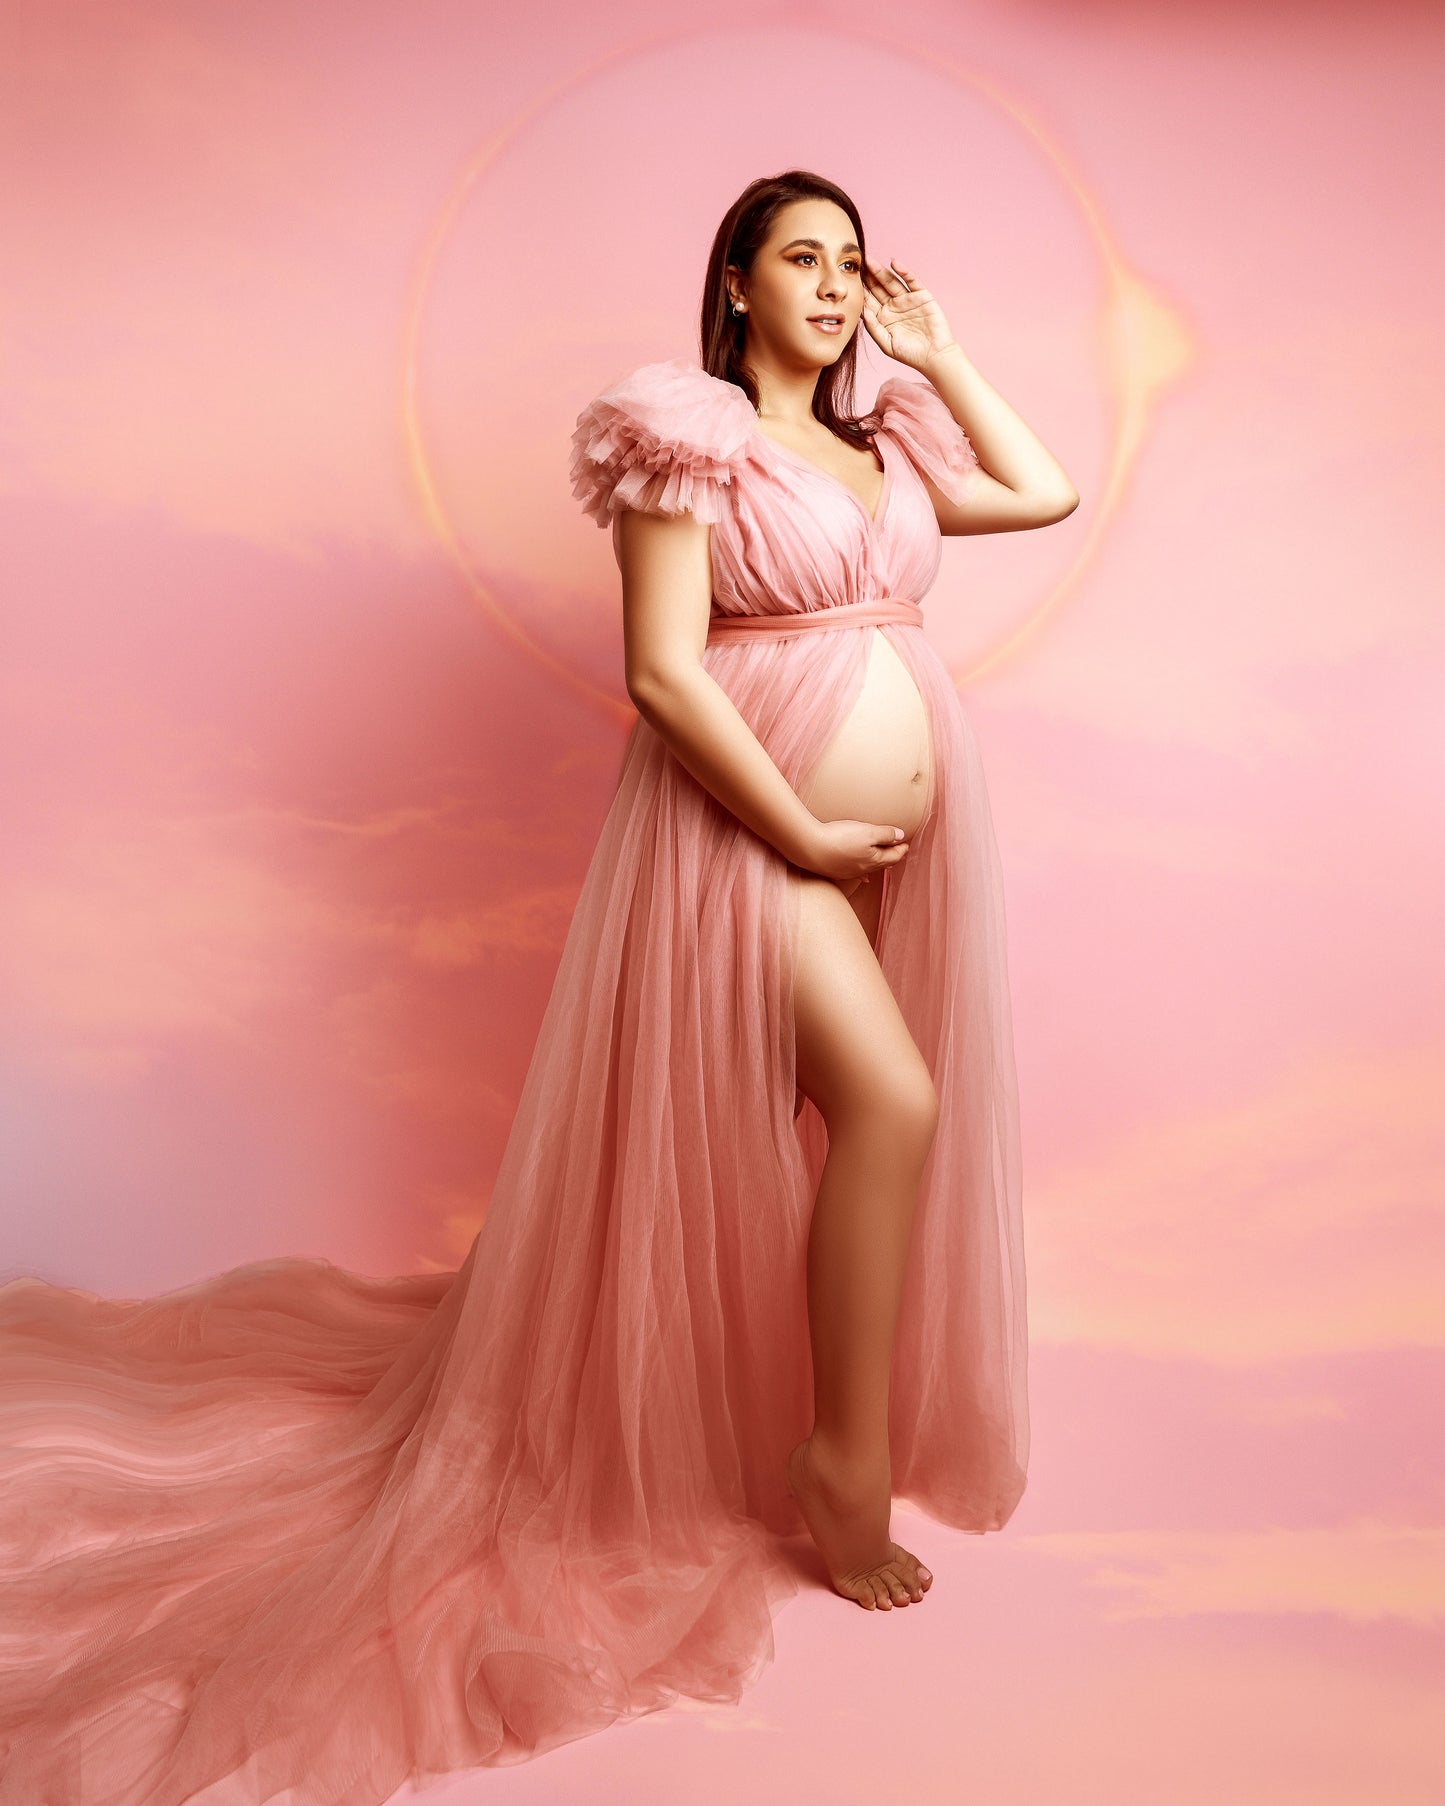 Maternity Photoshoot Dresses - Lotus - Pink Tulle Gown - 4 DAY RENTAL